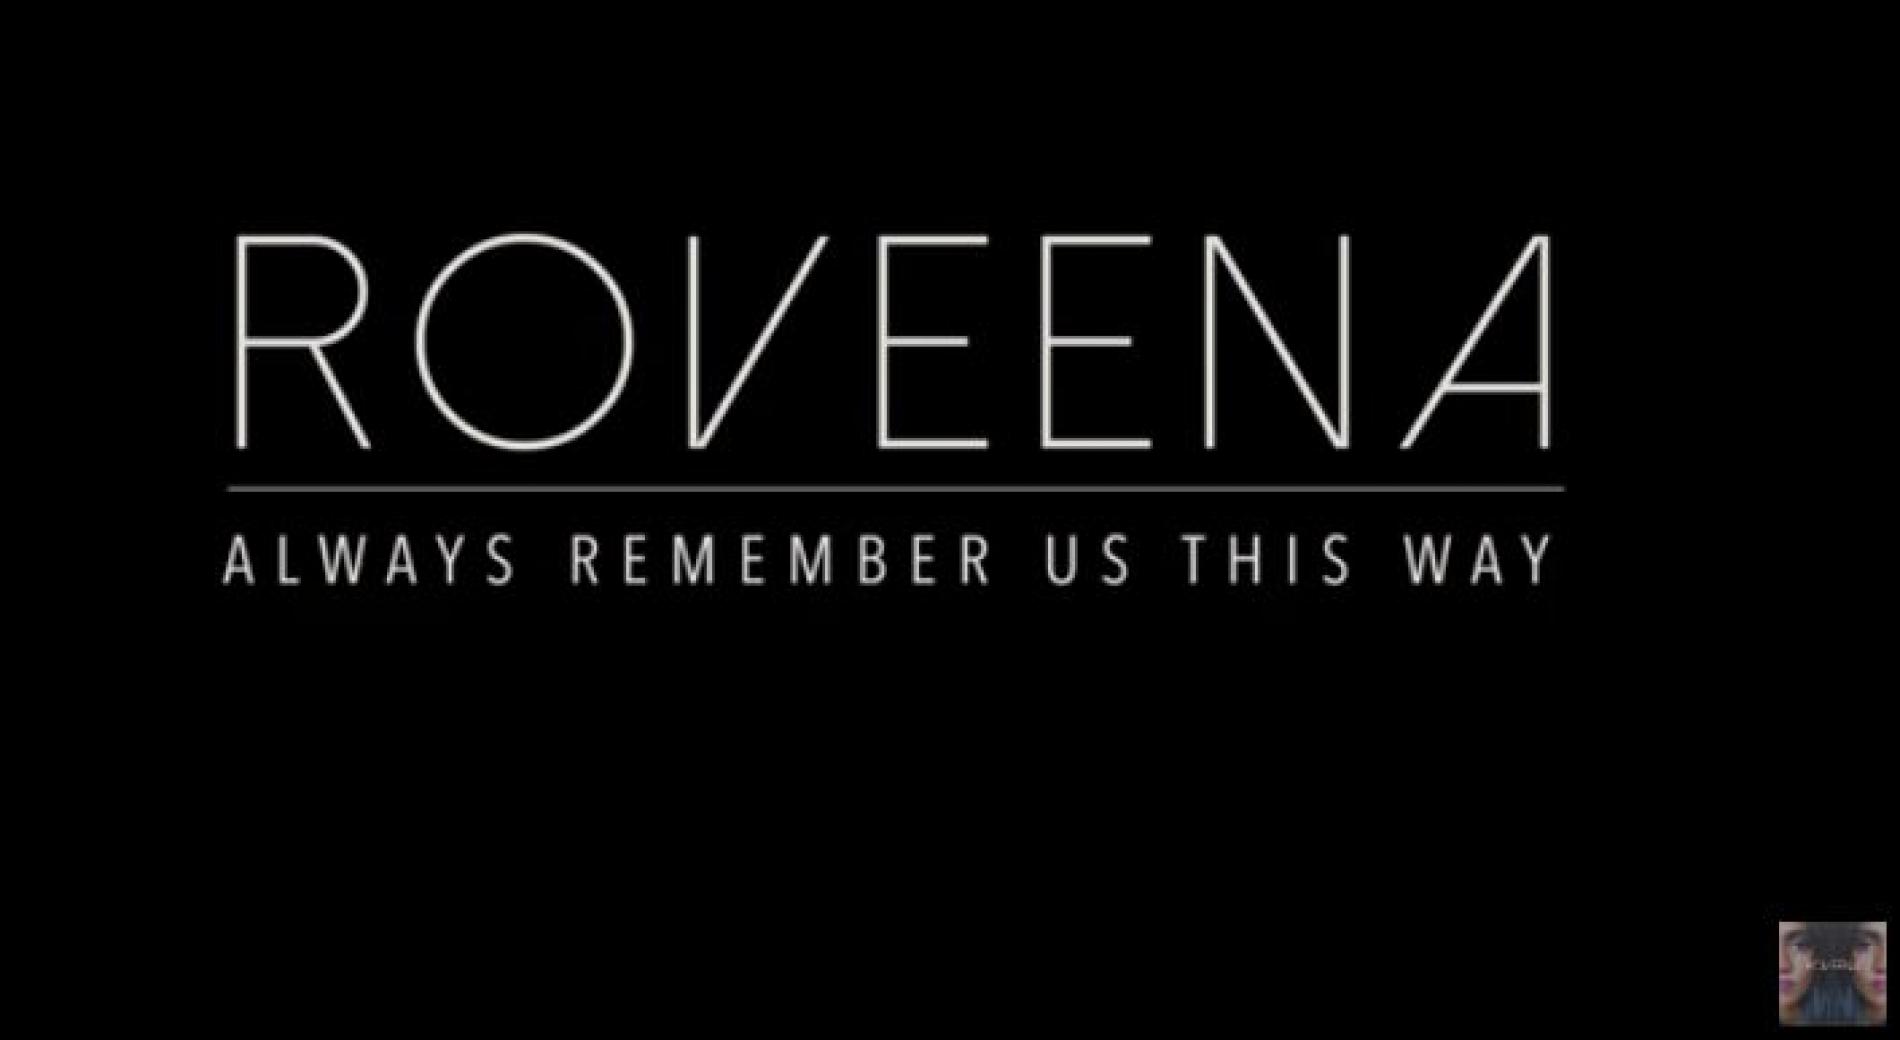 Roveena – Always Remember Us This Way (cover)